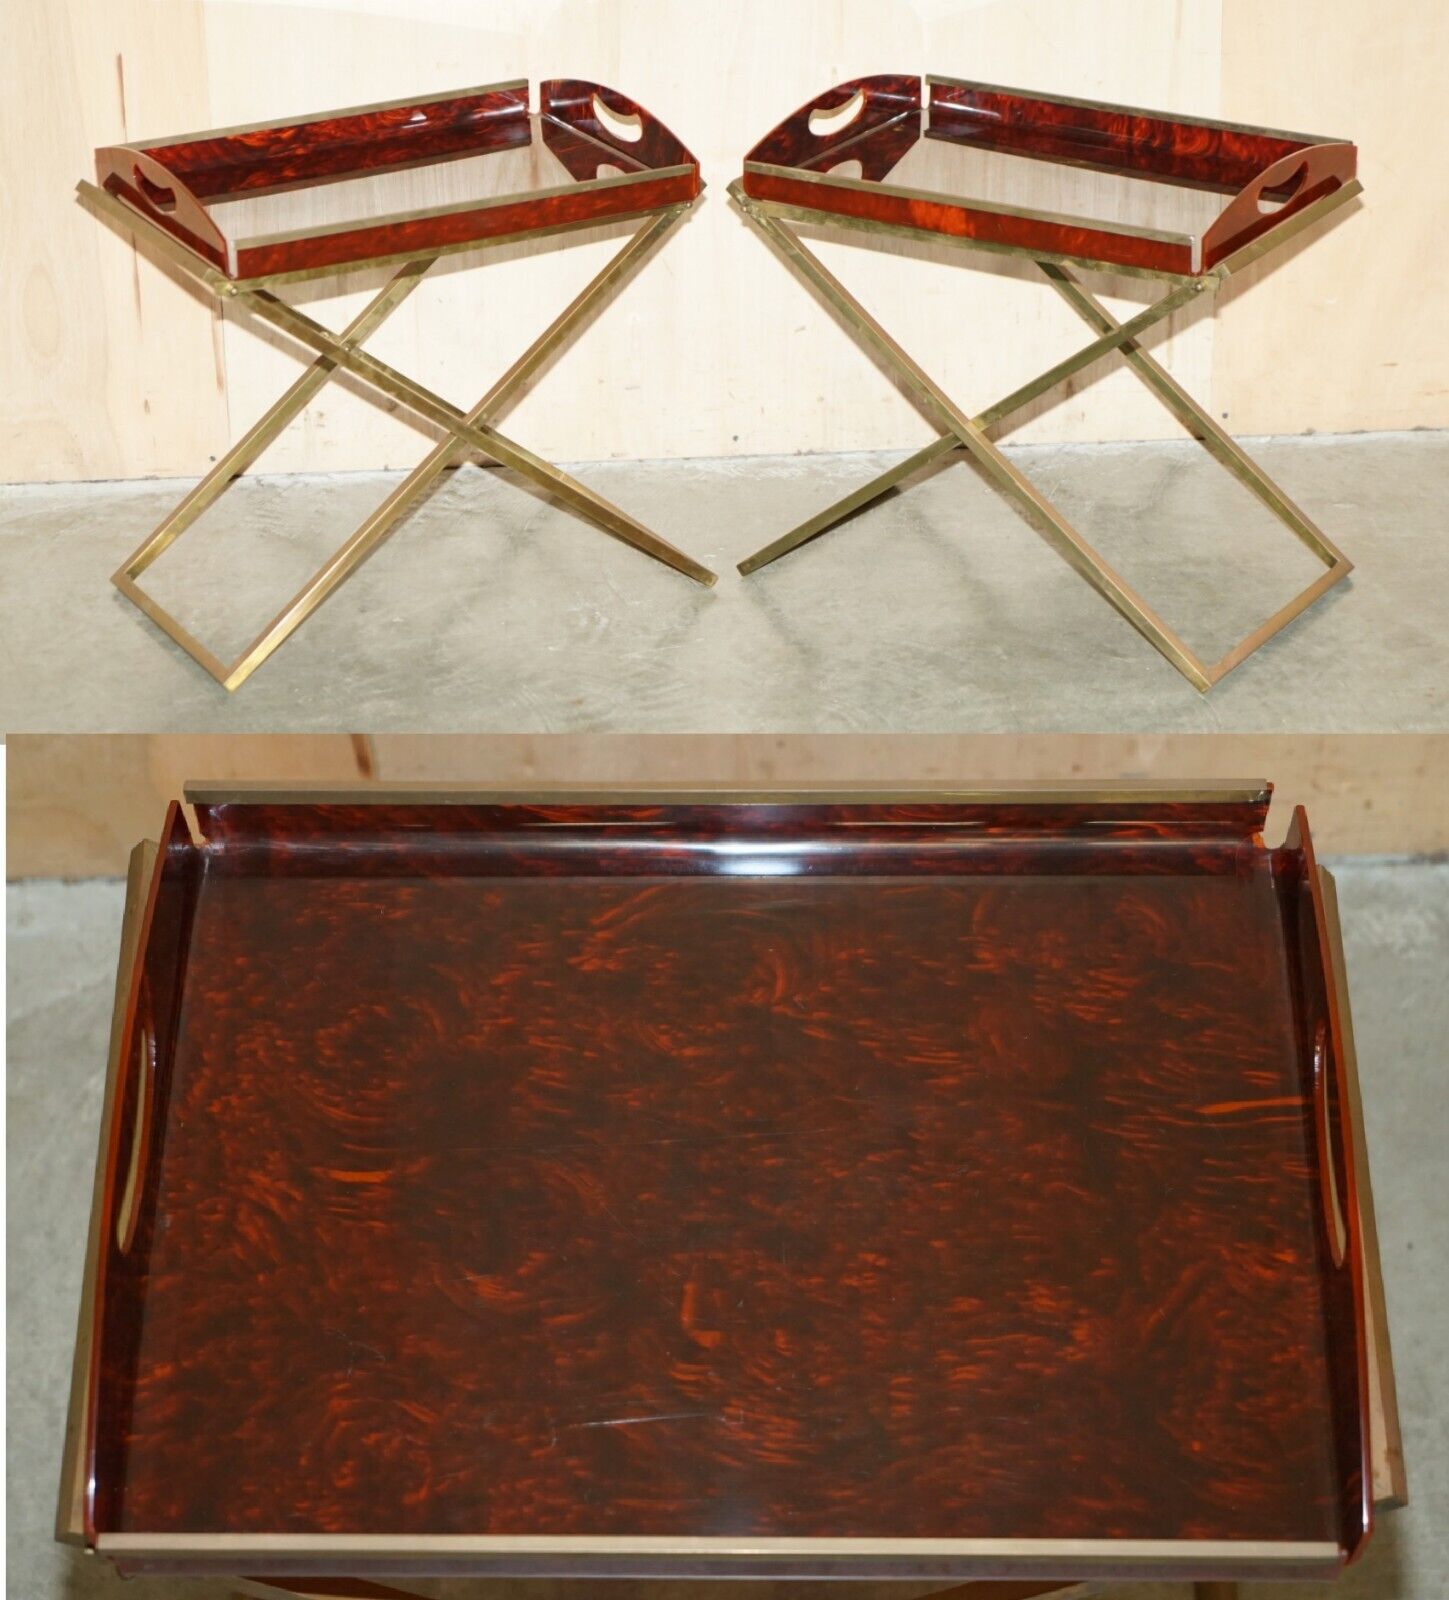 RARE PAIR OF MAISON MERCIER CIRCA 1970 FRENCH TRAY TABLES IN FAUX TORTOISE SHELL